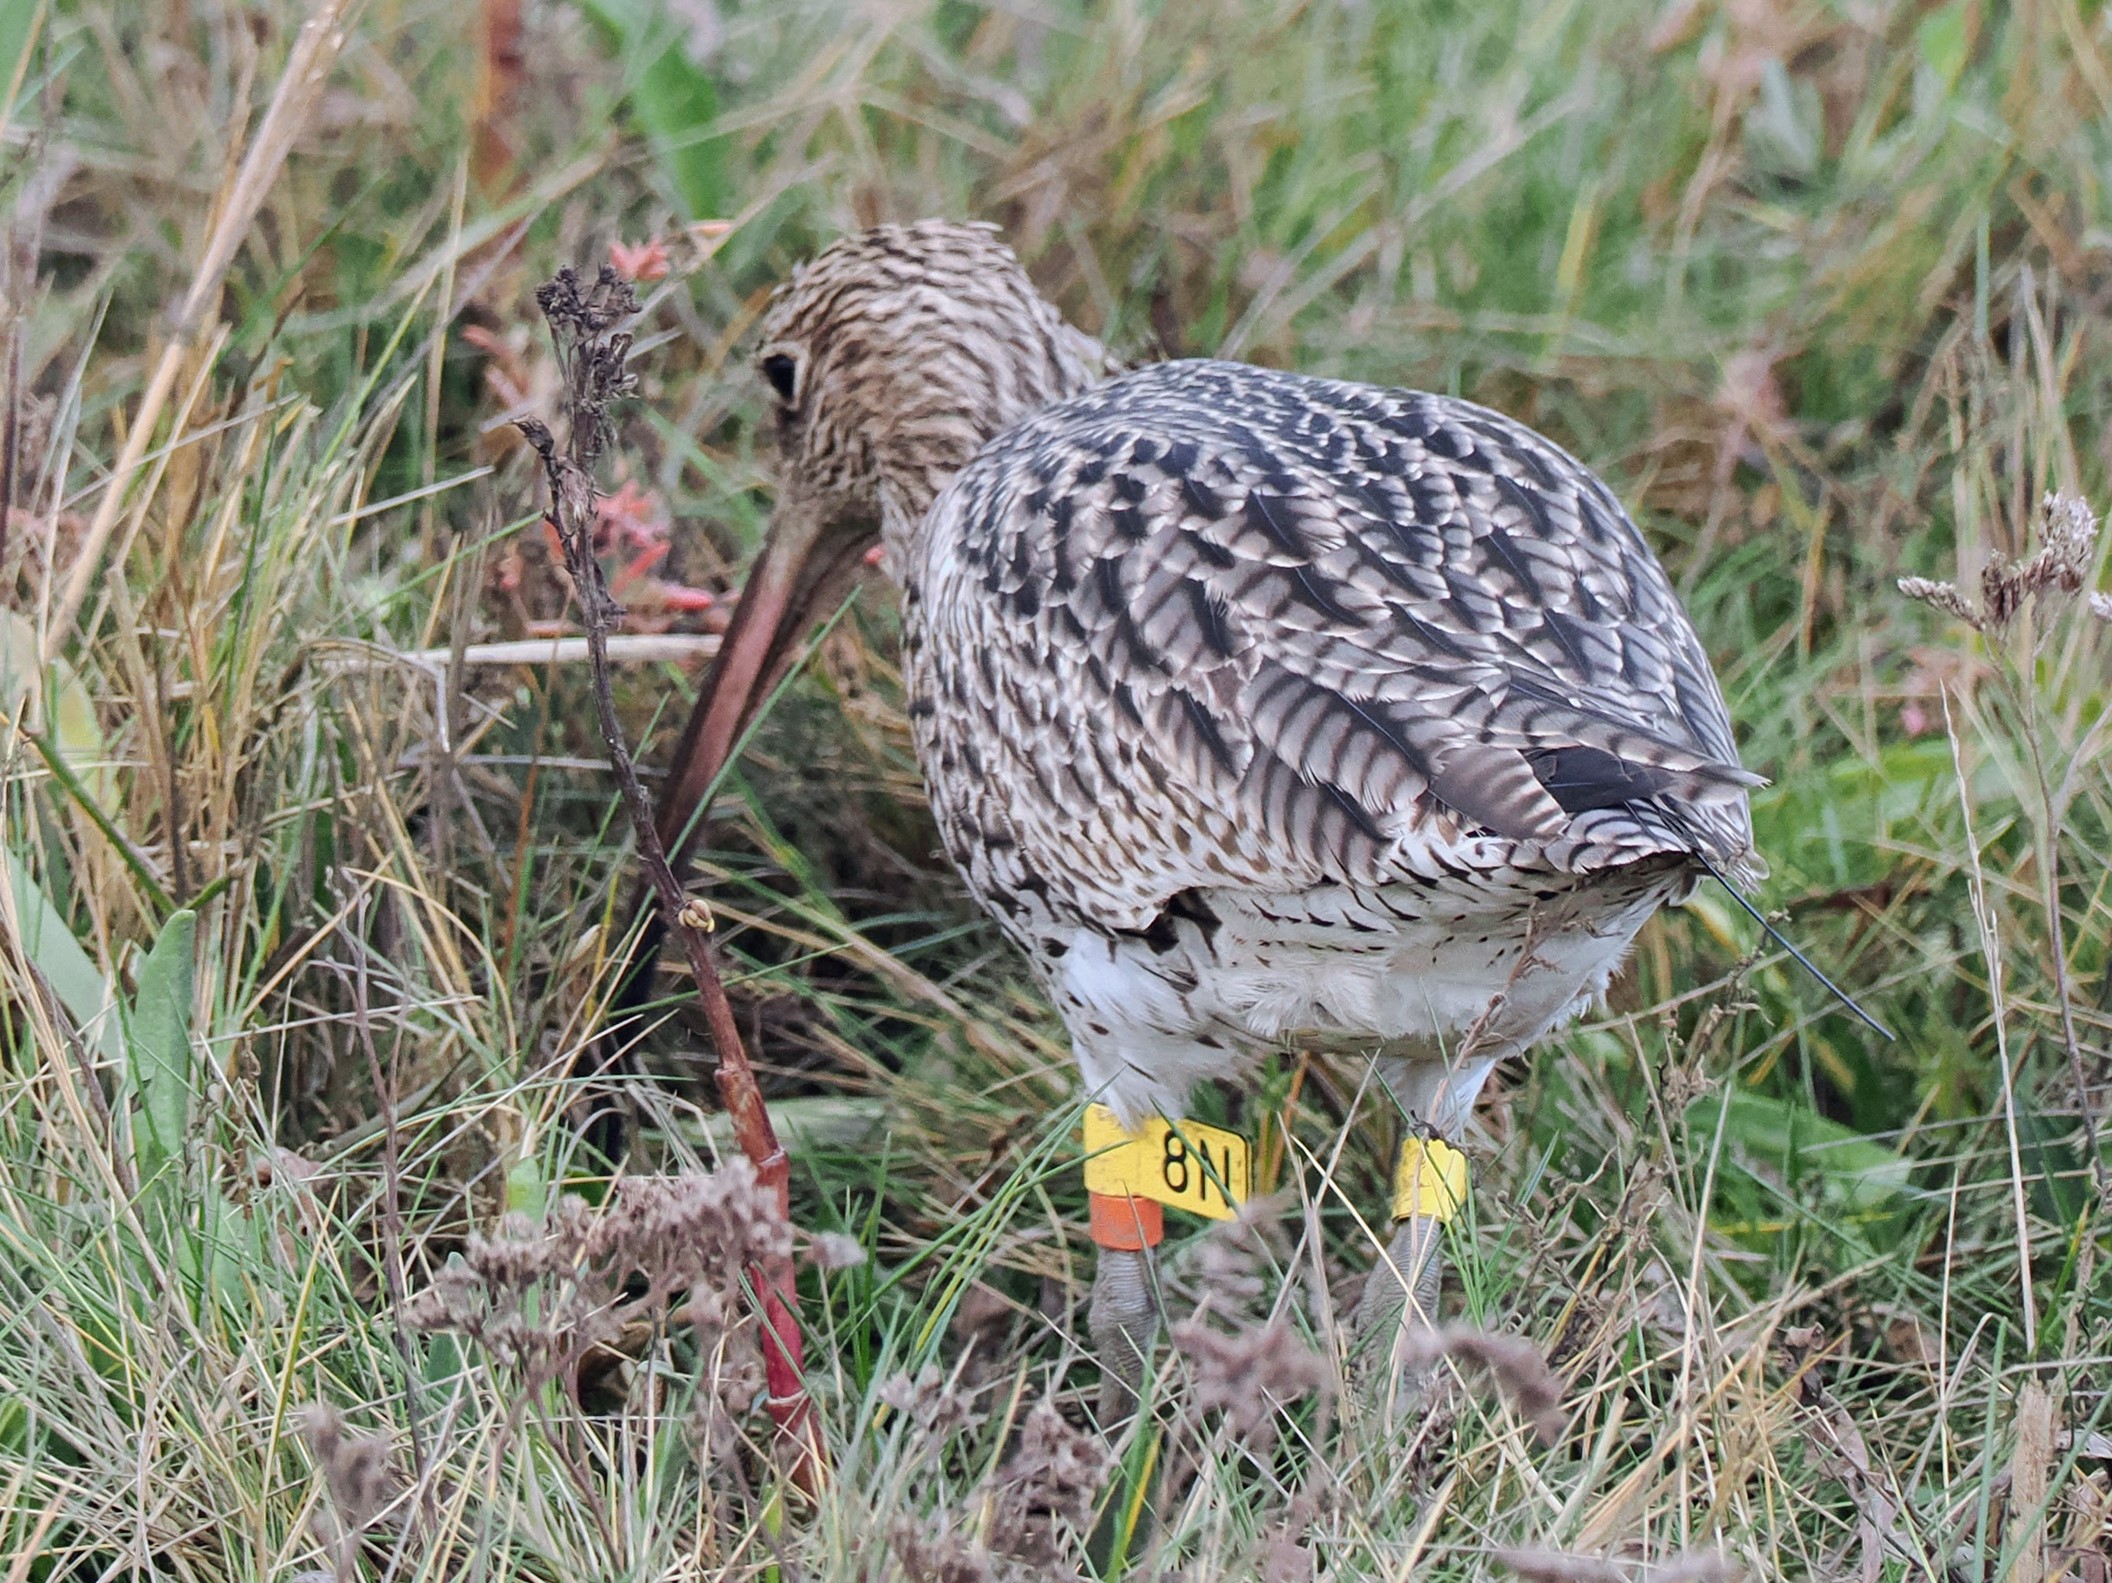 Image shows a Eurasian Curlew, a small brown bird with a distinctively long beak thin beak, walking in grassland.